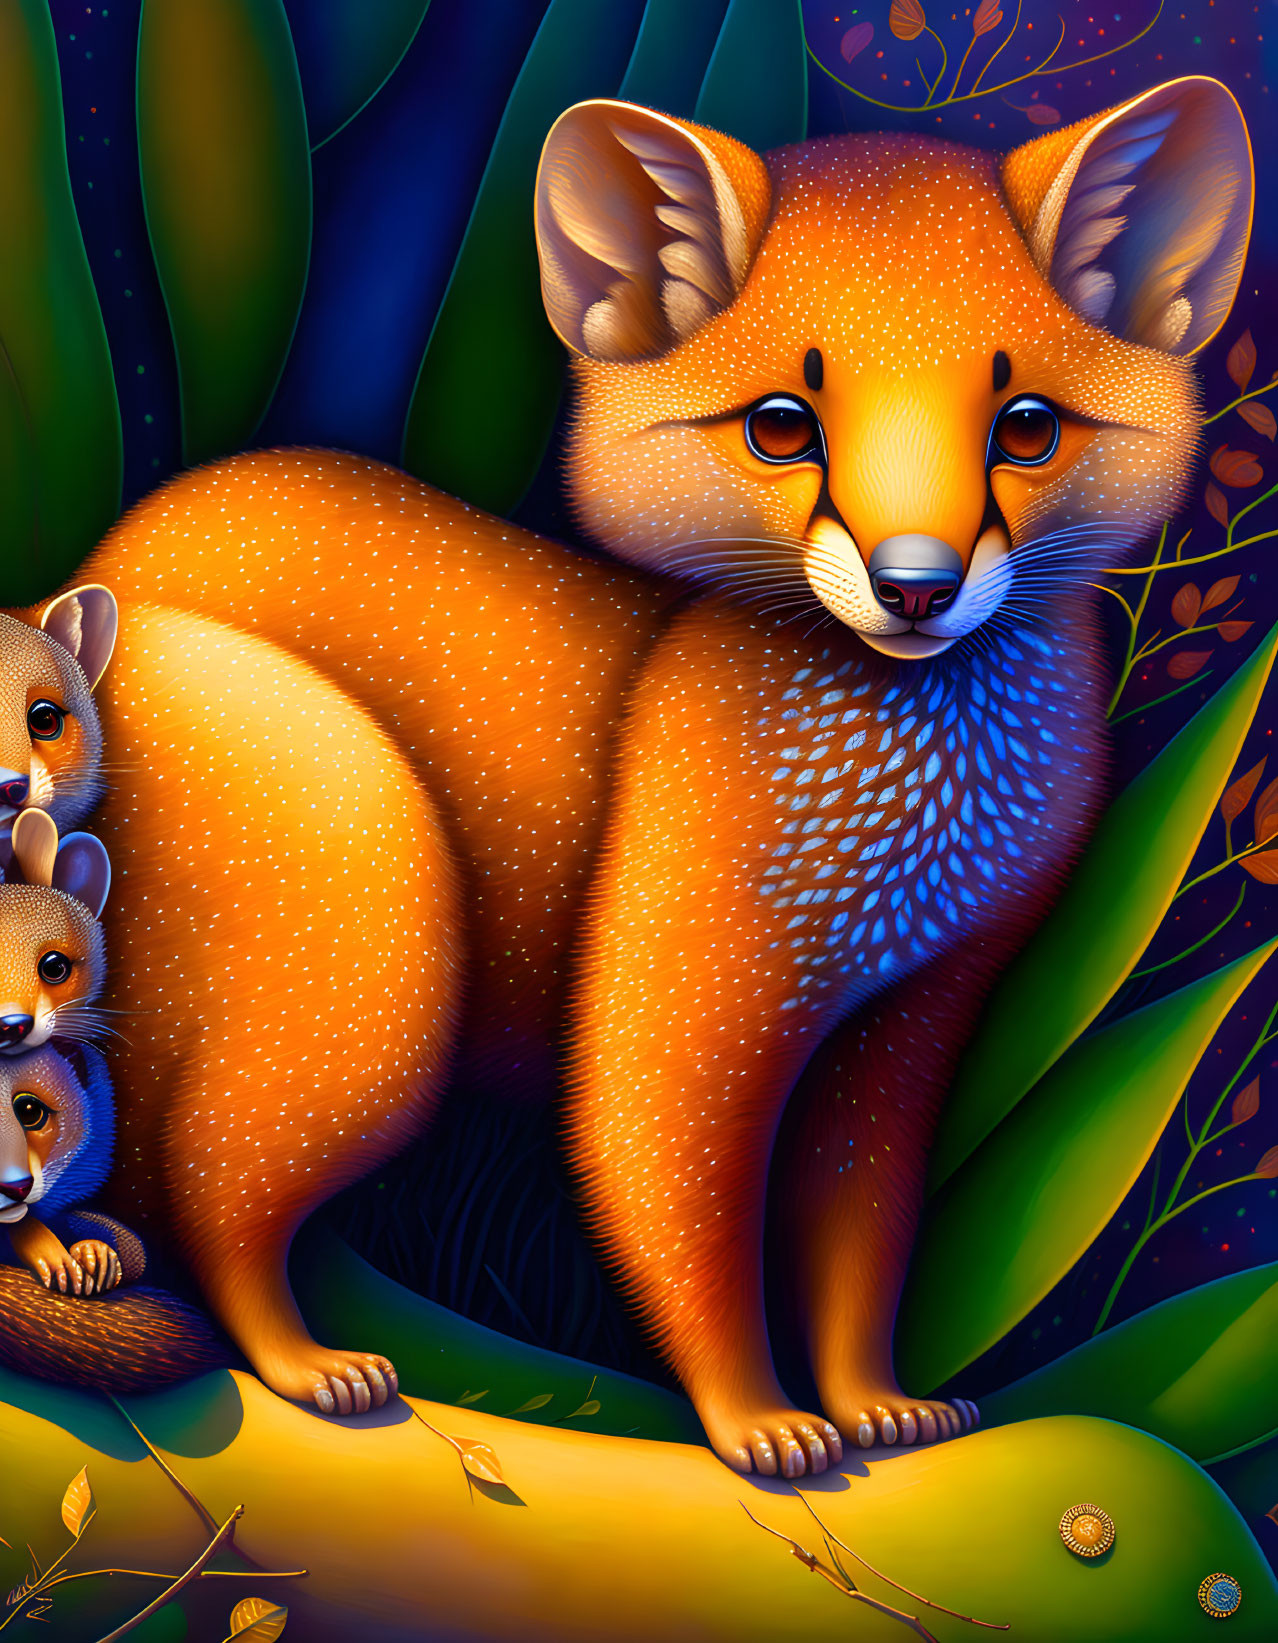 Colorful Stylized Adult Fox with Hidden Cubs in Lush Green Foliage